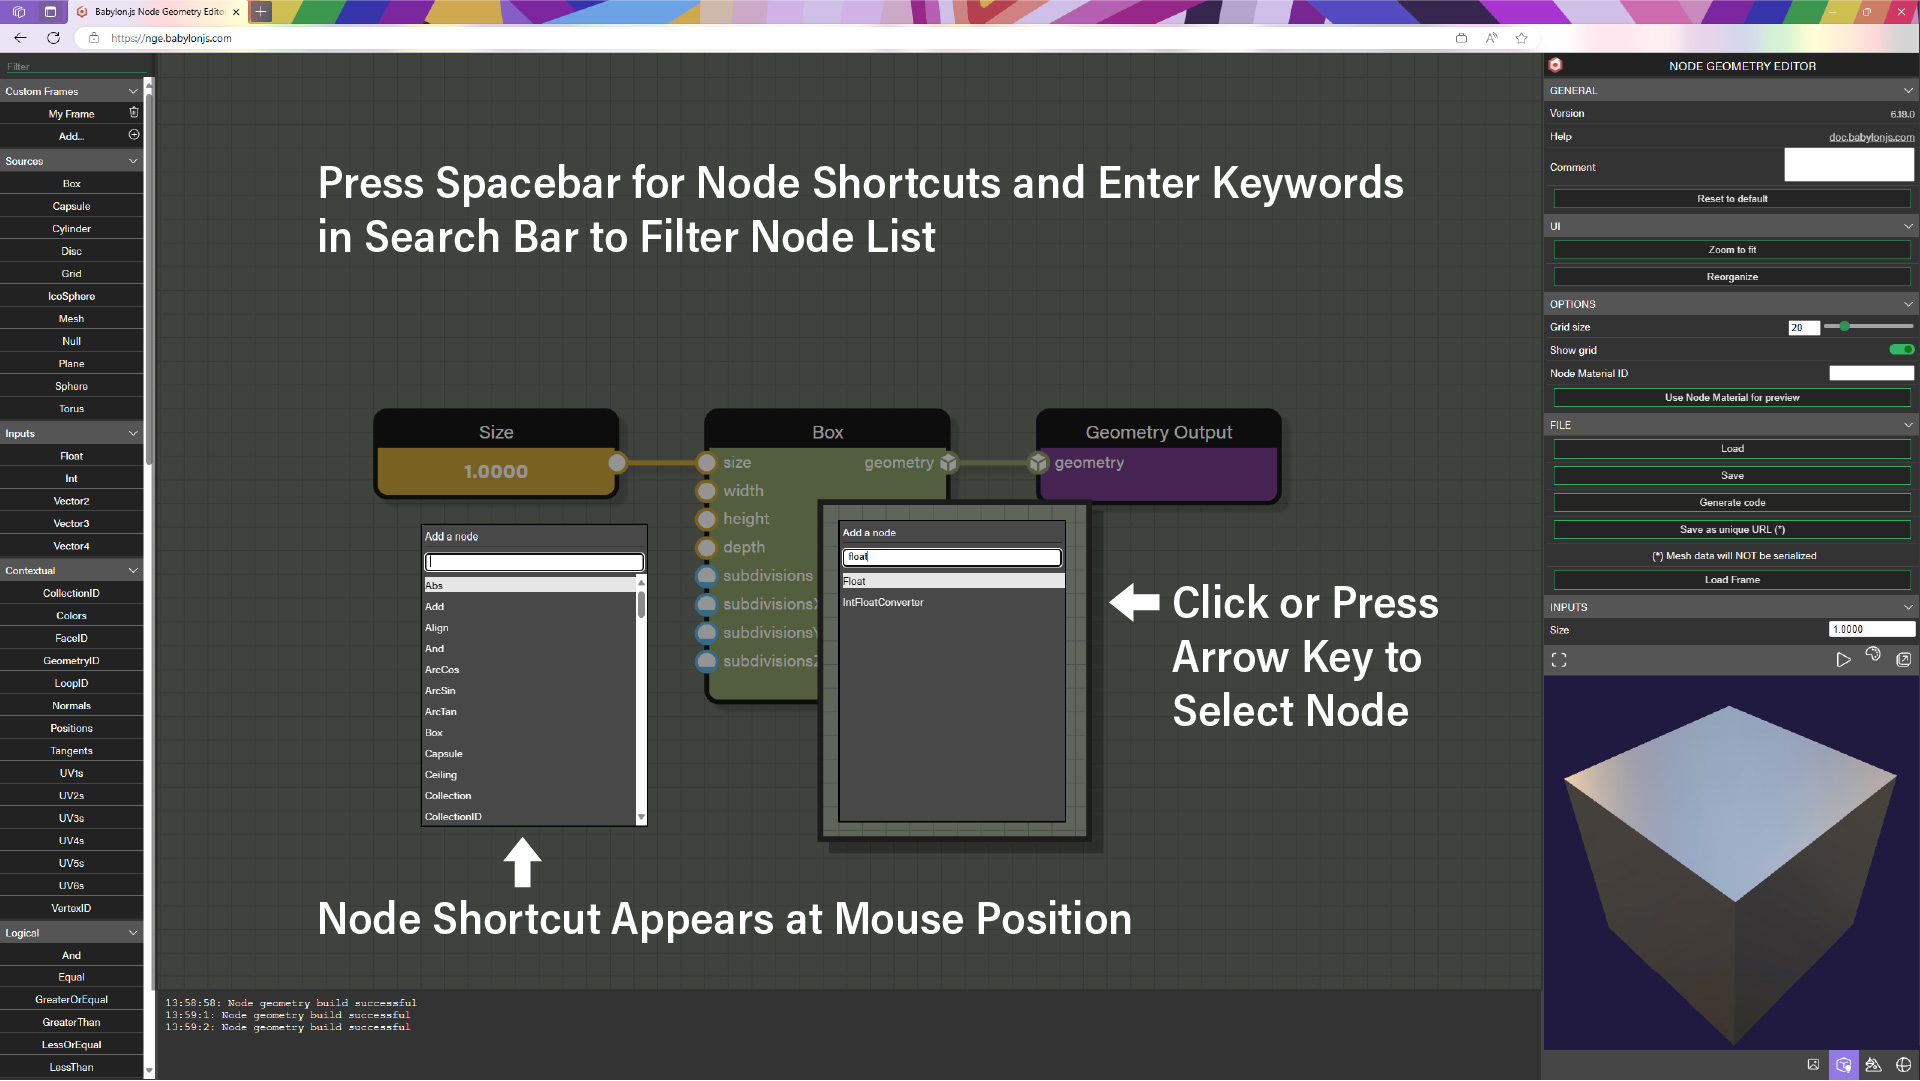 Press space bar for shortcut to search bar to filter node list which appears at the mouse position